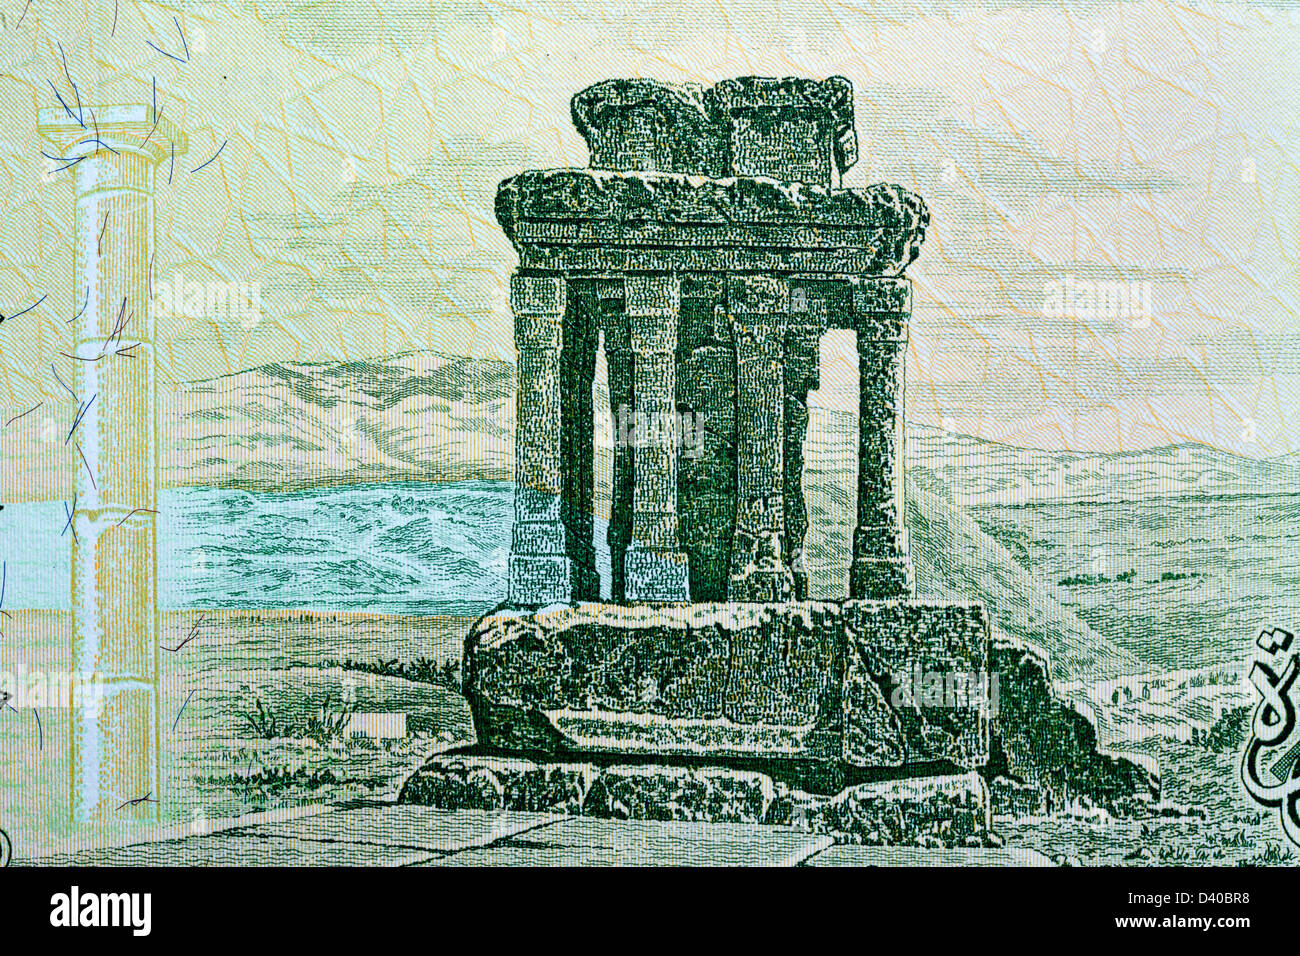 Ruins in Tyras from 250 Livres banknote, Lebanon, 1978 Stock Photo